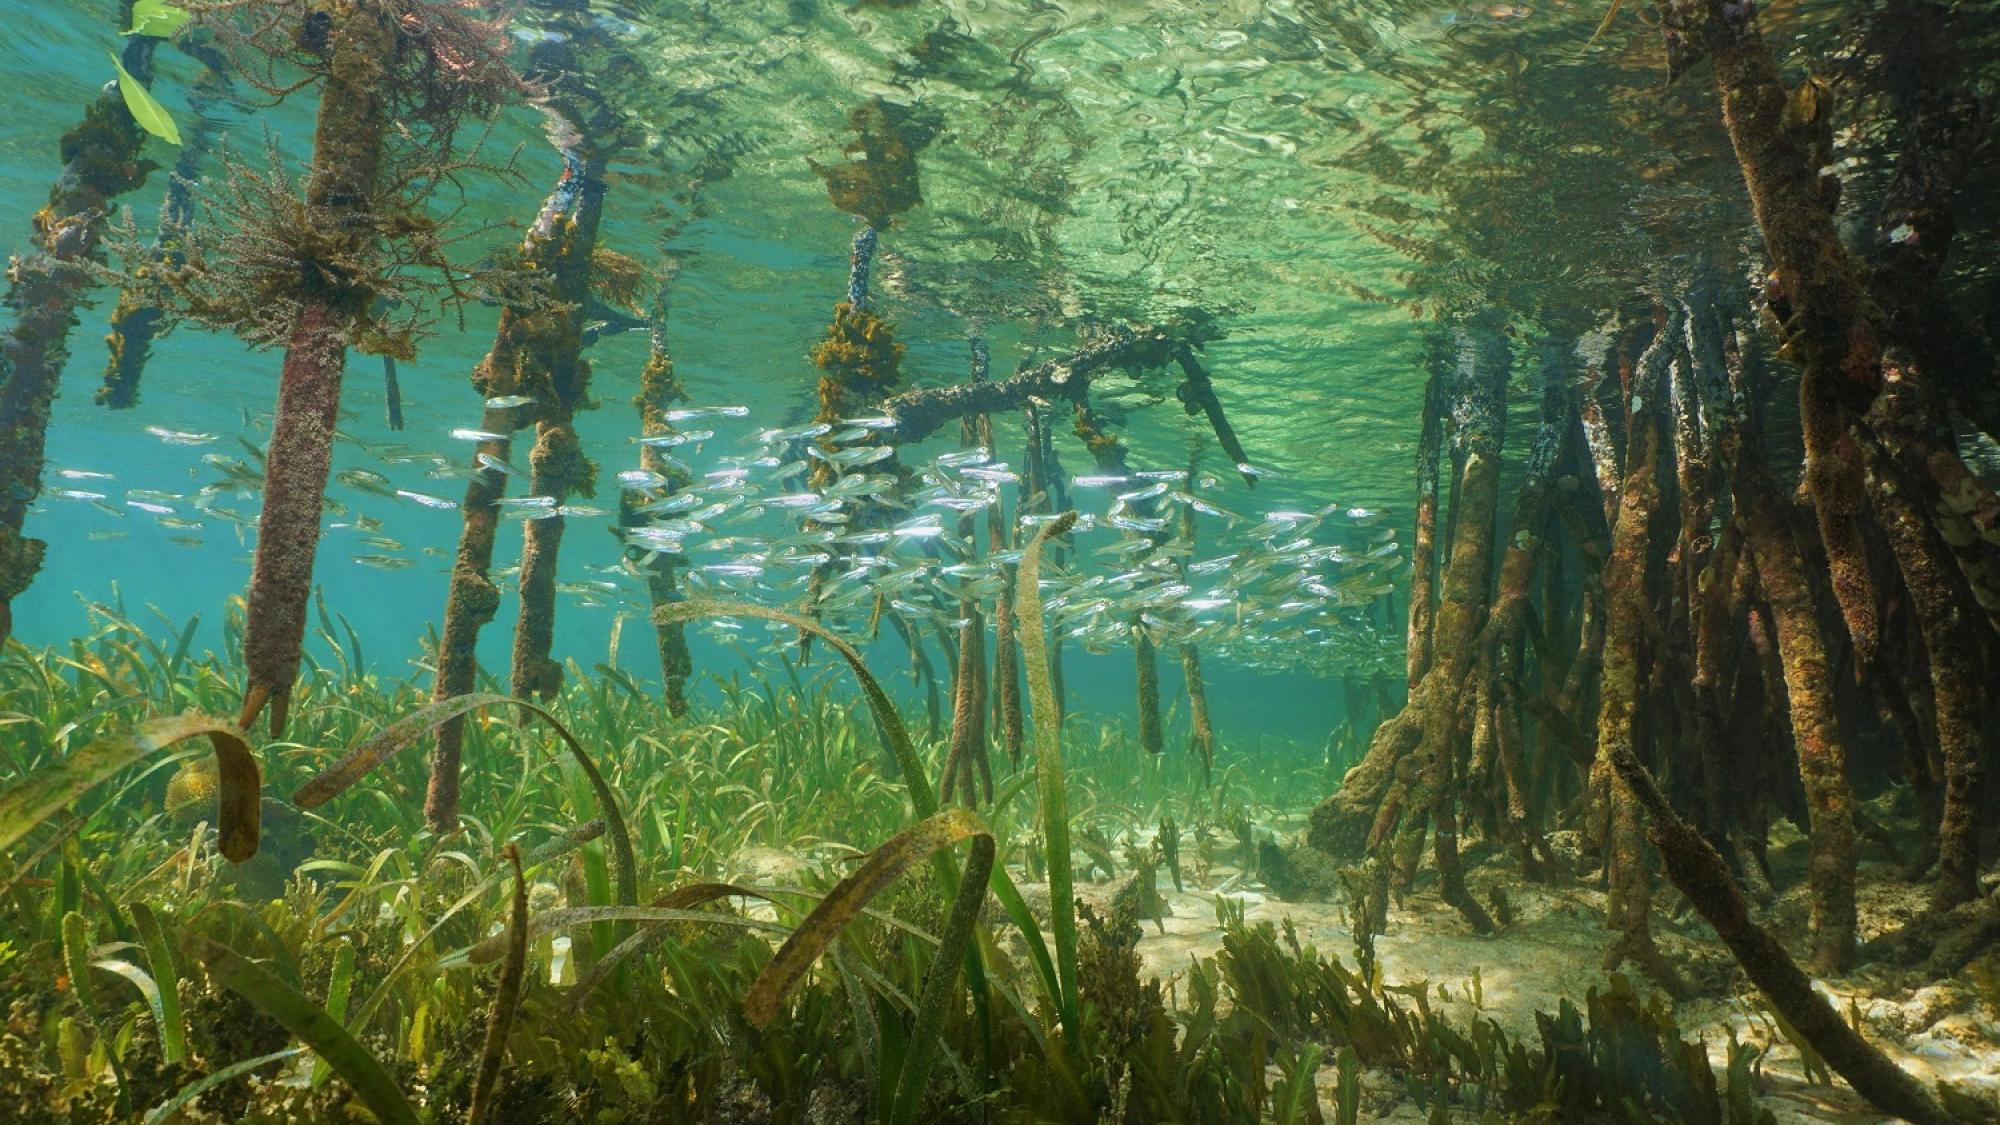 Seagrass and mangroves